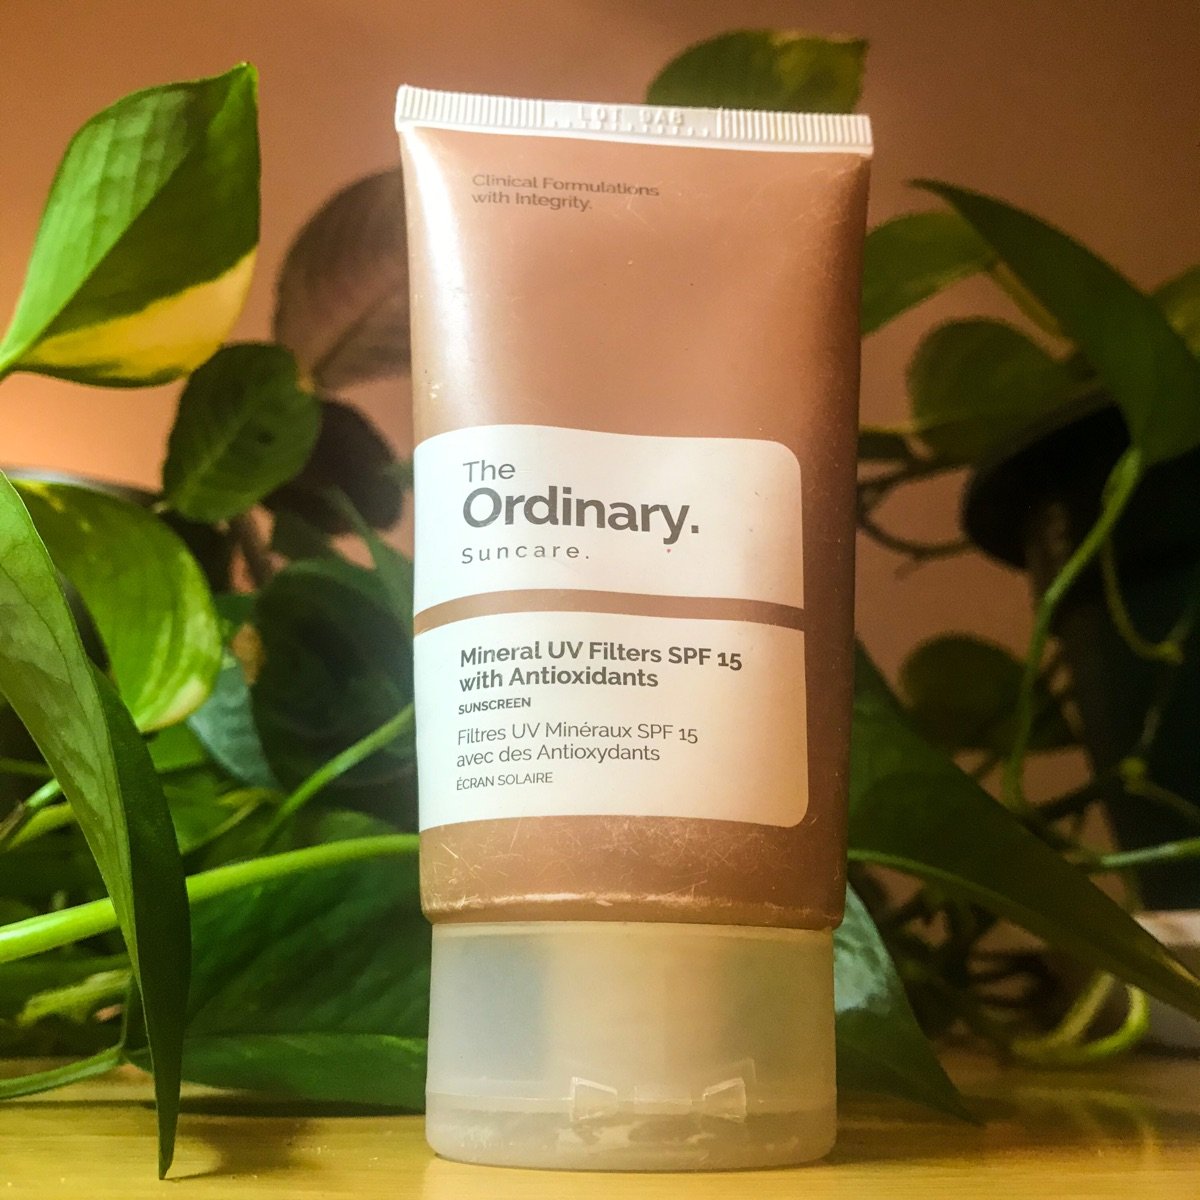 The Ordinary Mineral UV Filters SPF 30 with Antioxidants Review | abillion